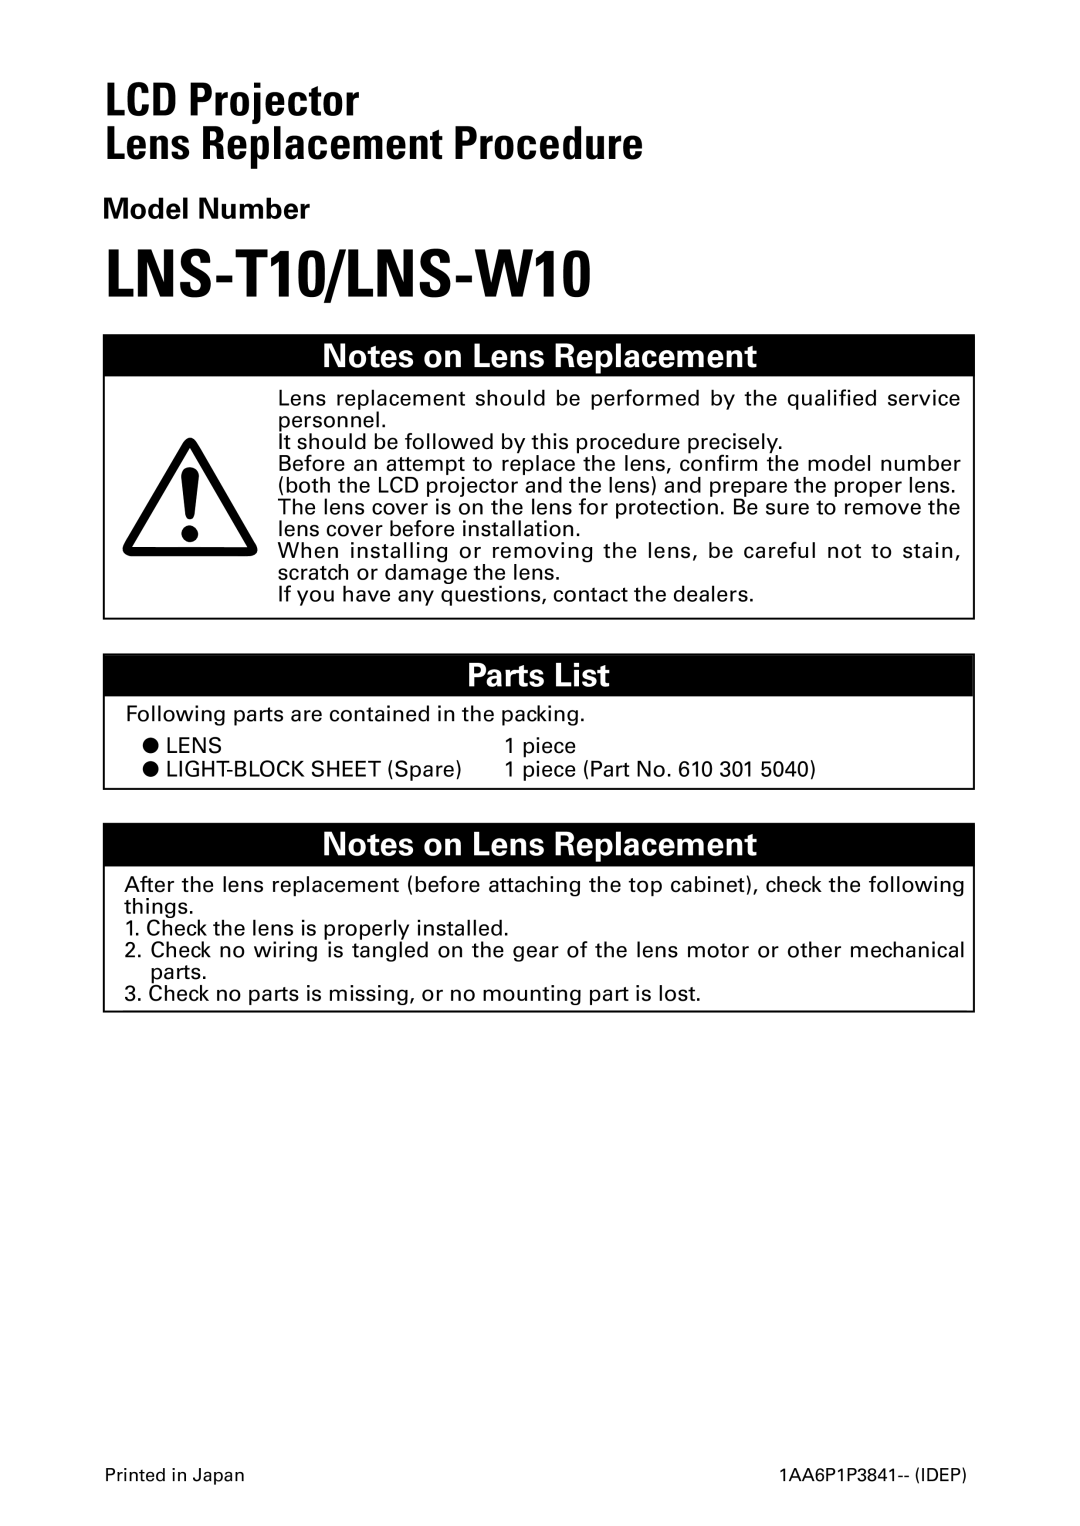 Fisher manual LNS-T10/LNS-W10, LCD Projector Lens Replacement Procedure, Notes on Lens Replacement, Parts List 